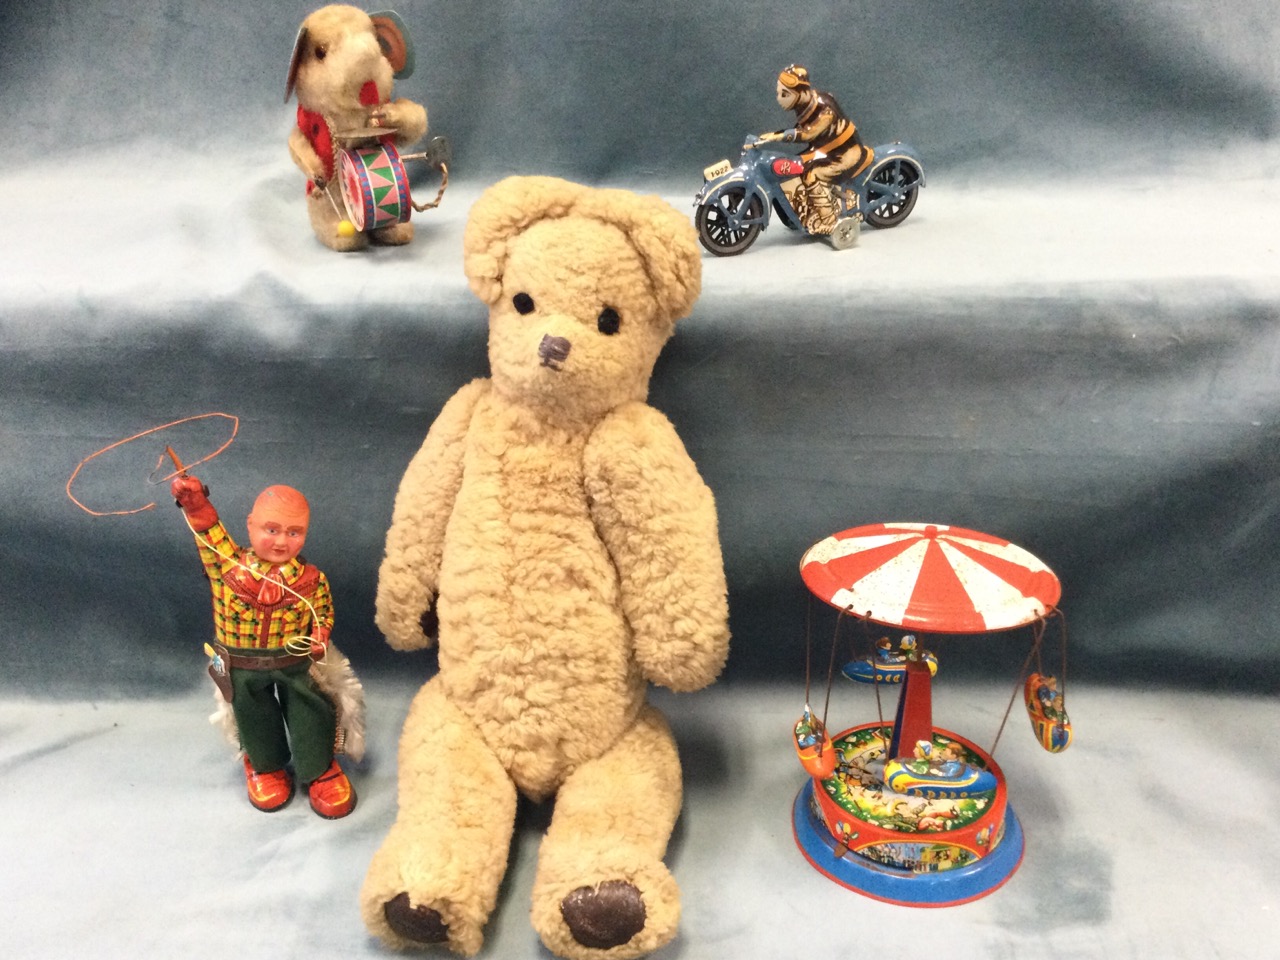 A working mechanical mouse playing drums & cymbal; a plush jointed teddy with stitched snout and